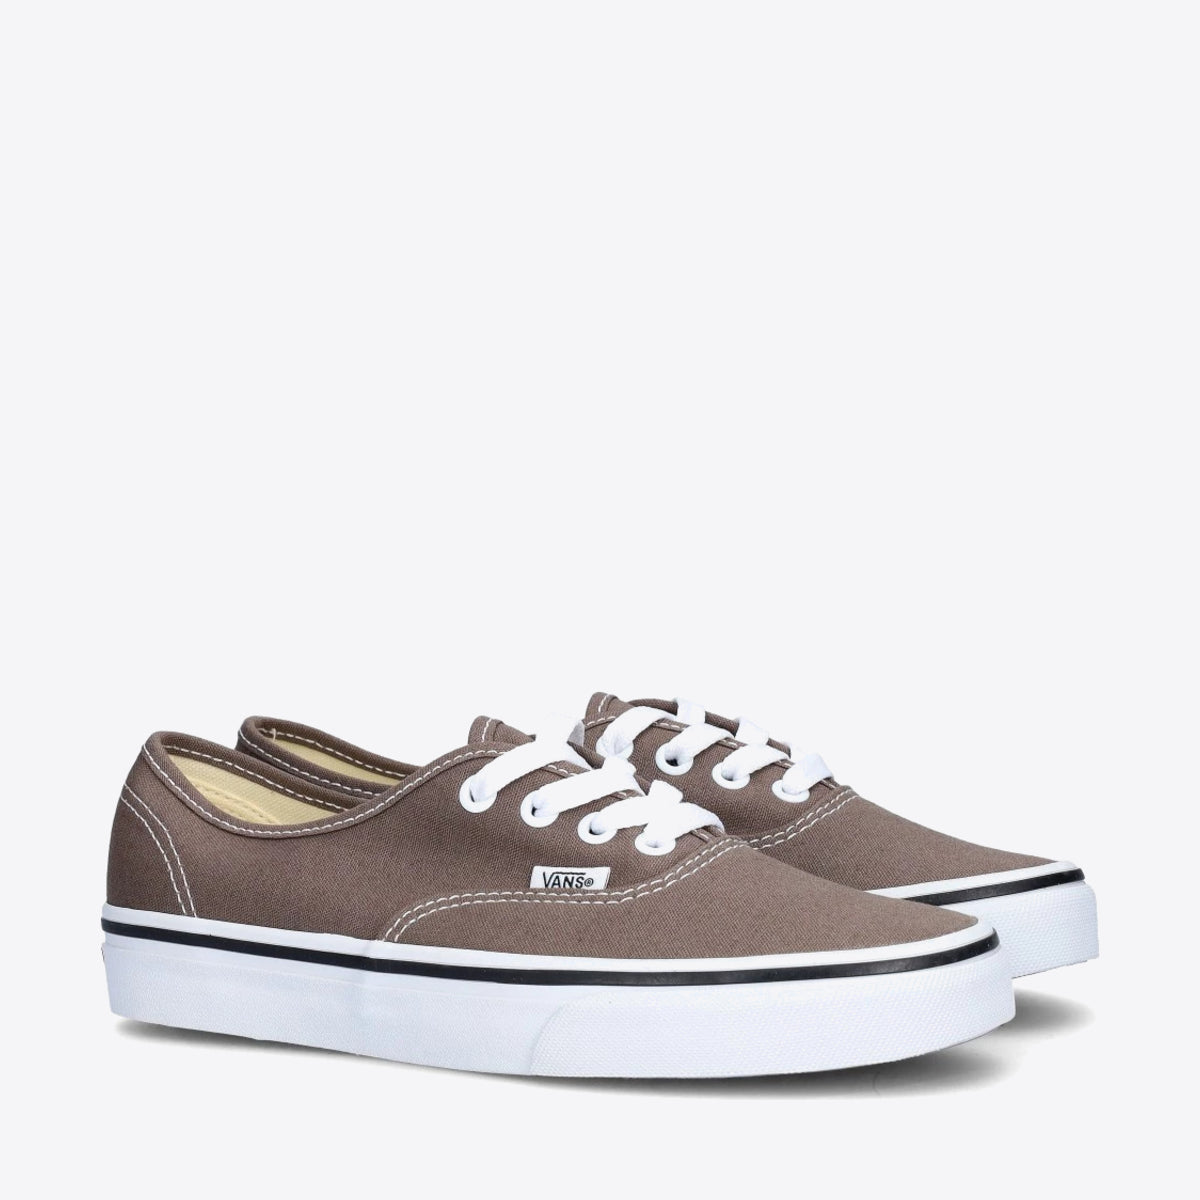 VANS Authentic Colour Theory Bungee Cord - Image 11